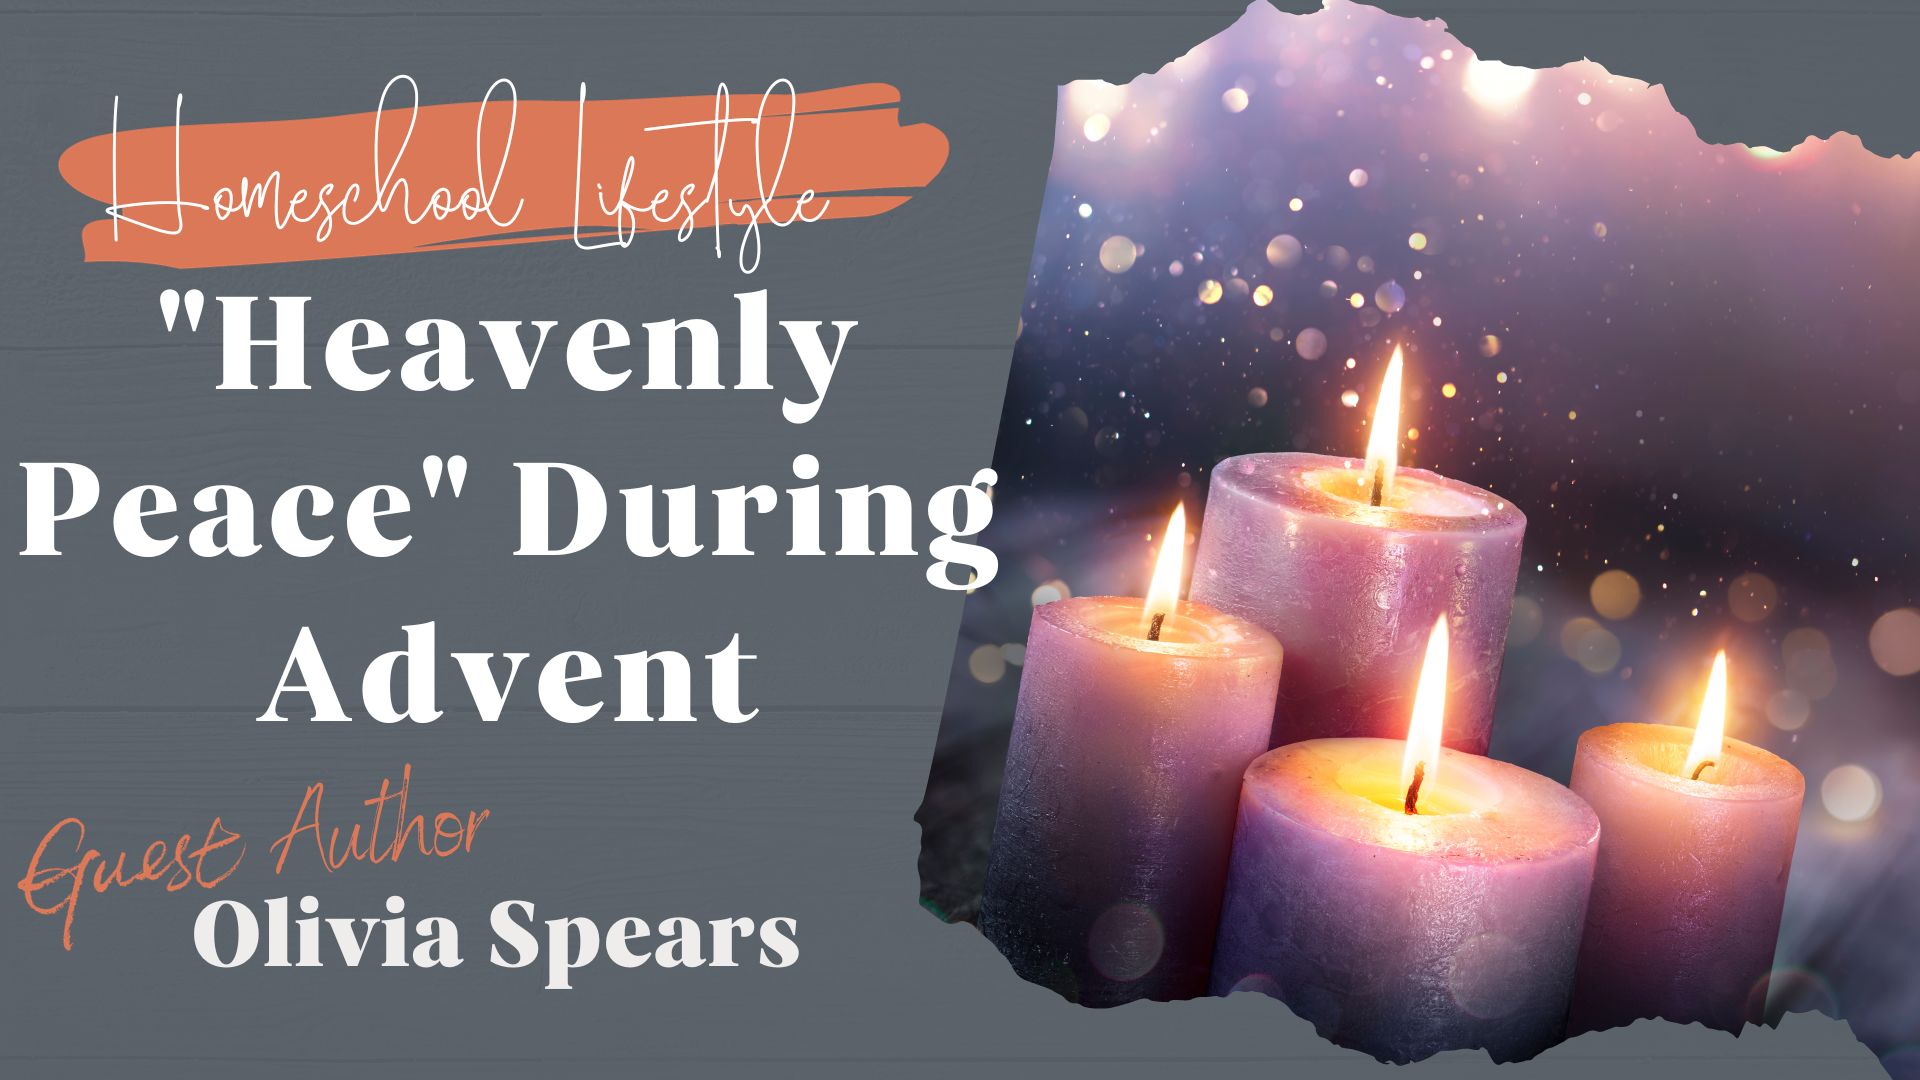 “Heavenly Peace” During Advent